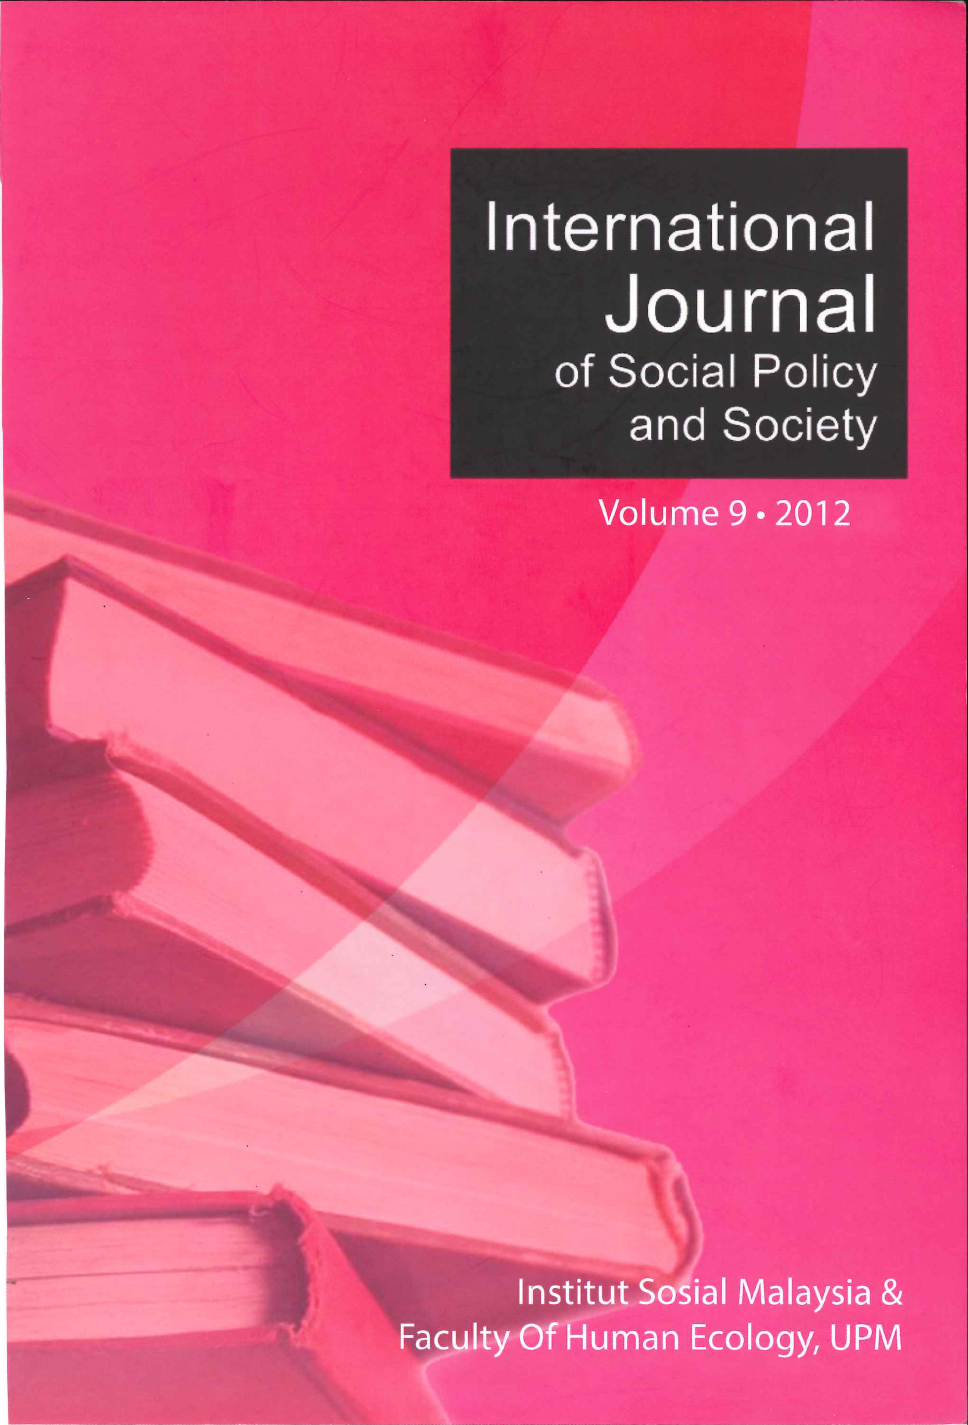 					View Vol. 9 (2012): International Journal of Social Policy and Society Volume 9 2012
				